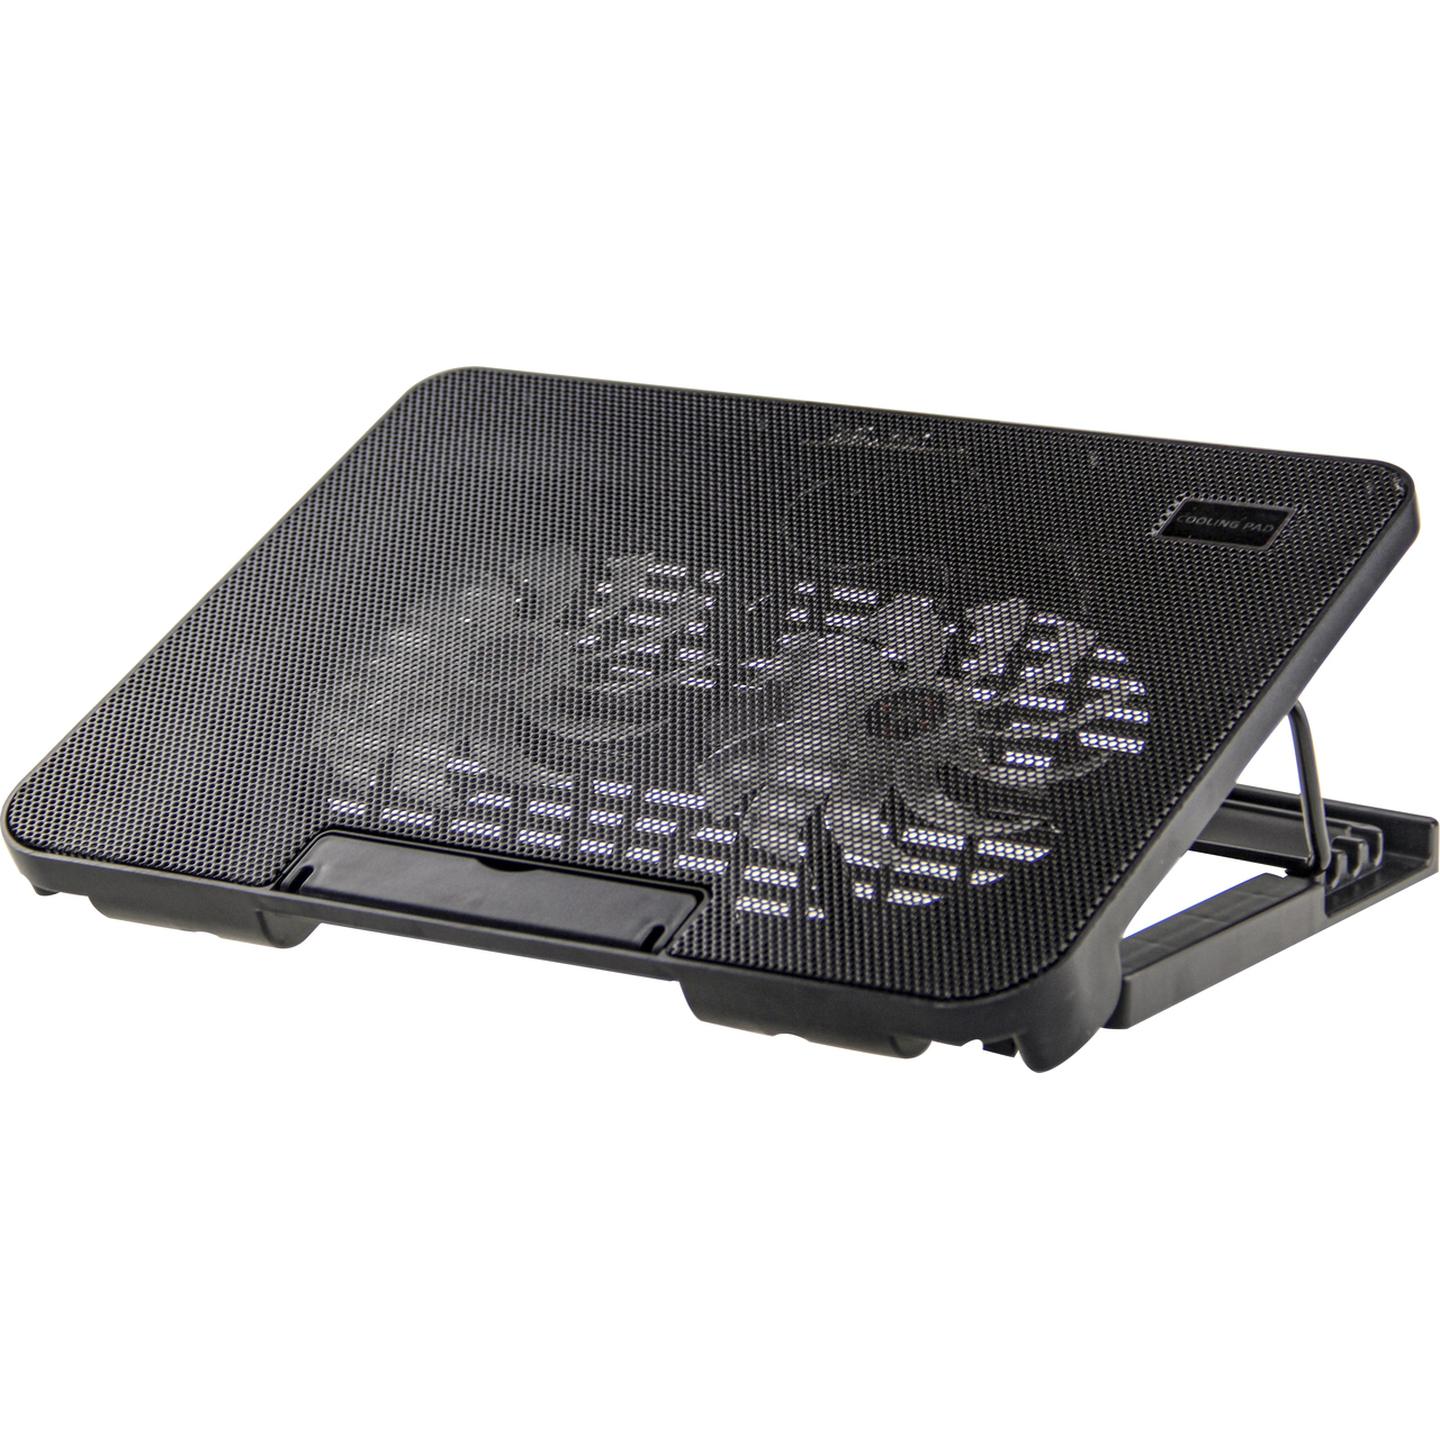 Black Dual Fan Cooling Pad for Notepads